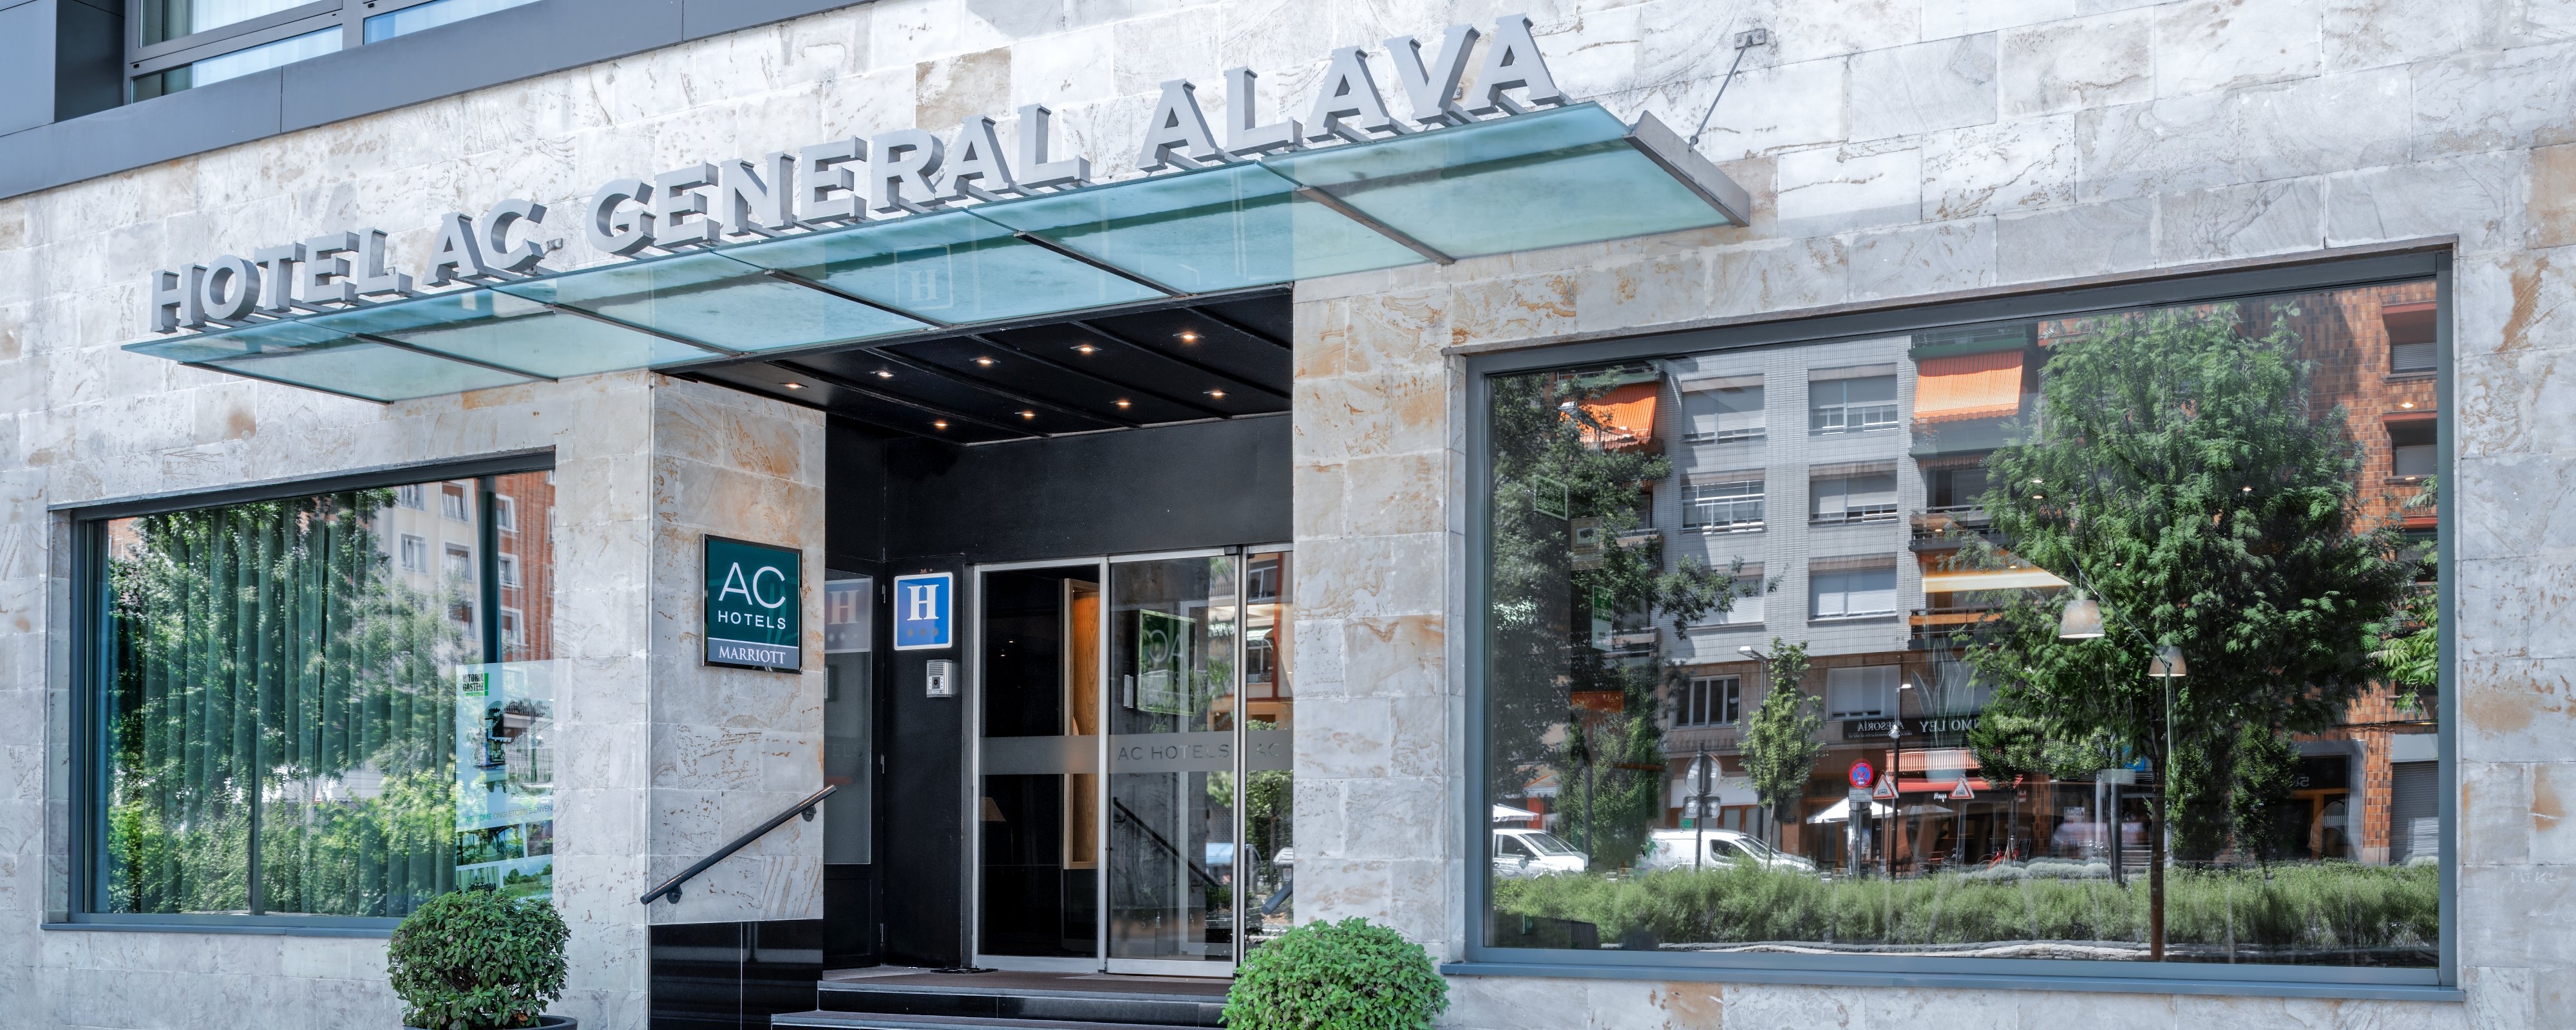 Image for AC Hotel General Alava, a Marriott hotel.